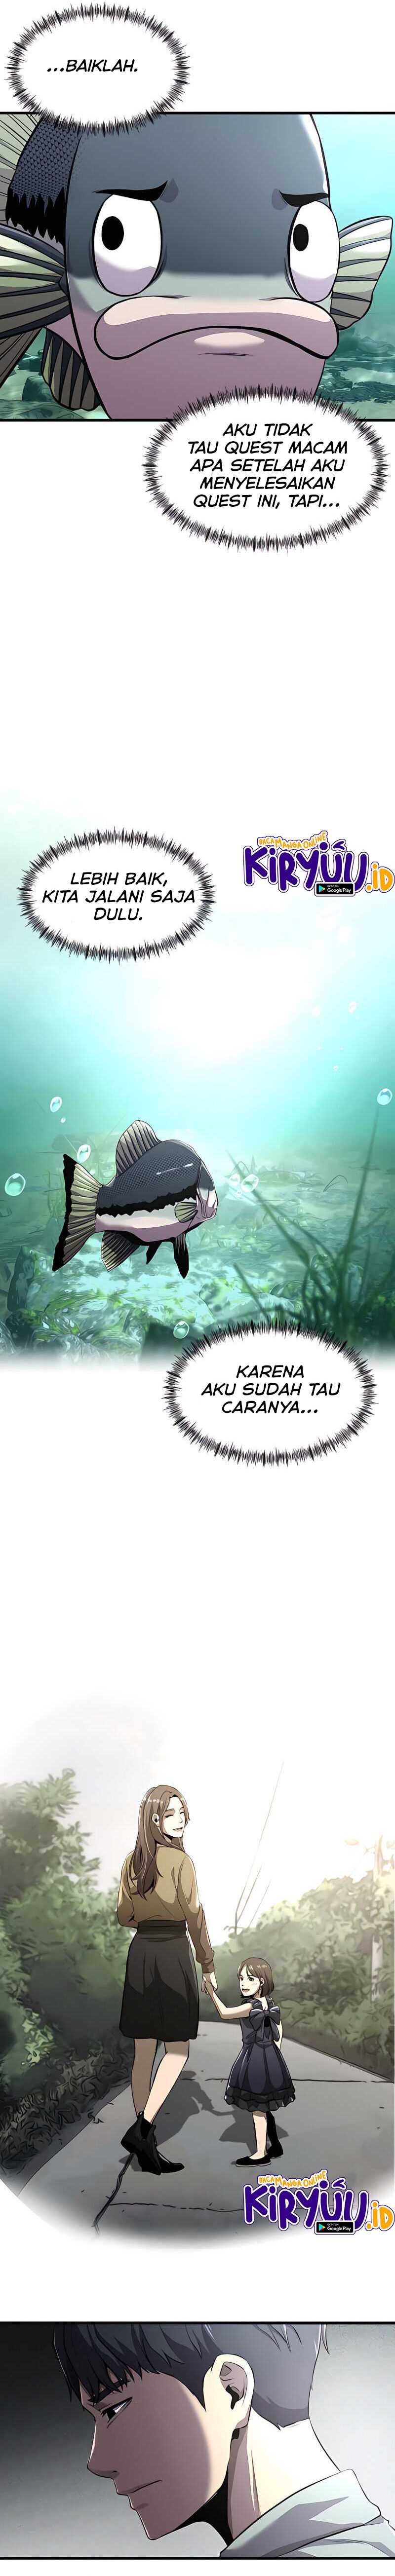 Surviving as a Fish Chapter 04